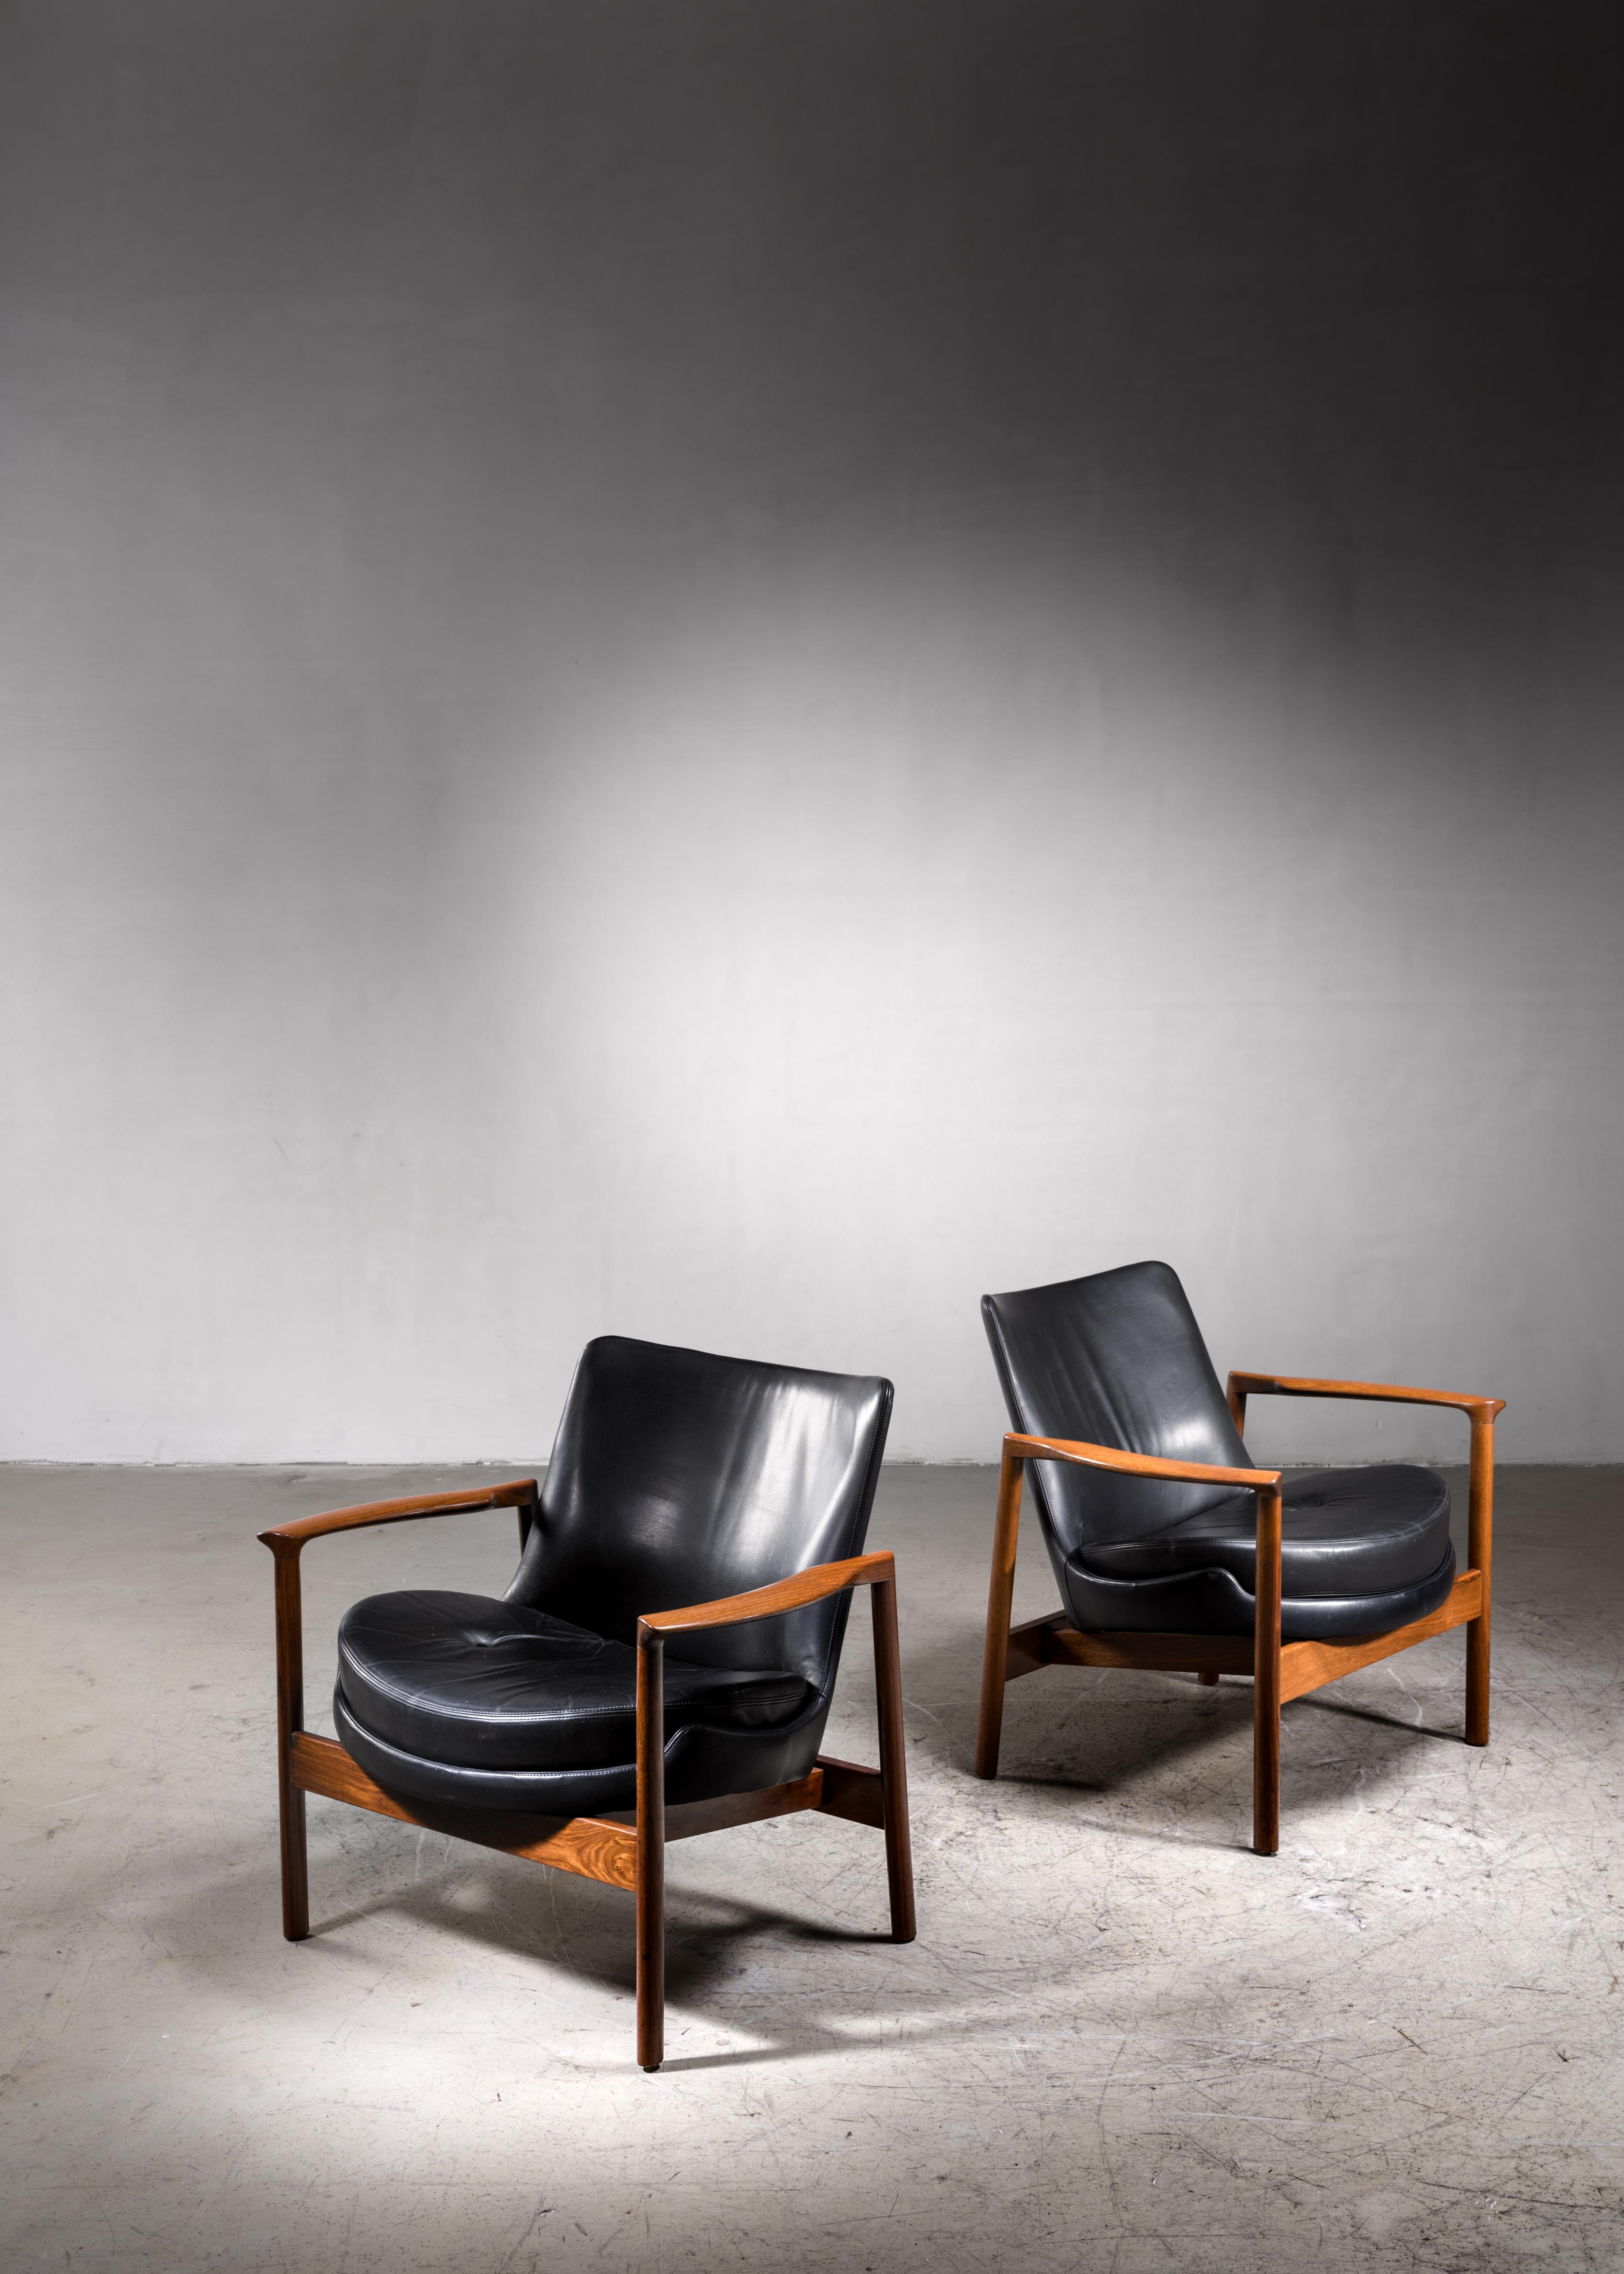 Ib Kofod-Larsen Lounge Chairs, an adaption of the Elizabeth chair commissioned for Forscher. The chairs are made of a walnut frame with curved armrests and a black leather upholstery with a loose cushion.
This is an adapted version of the Elizabeth